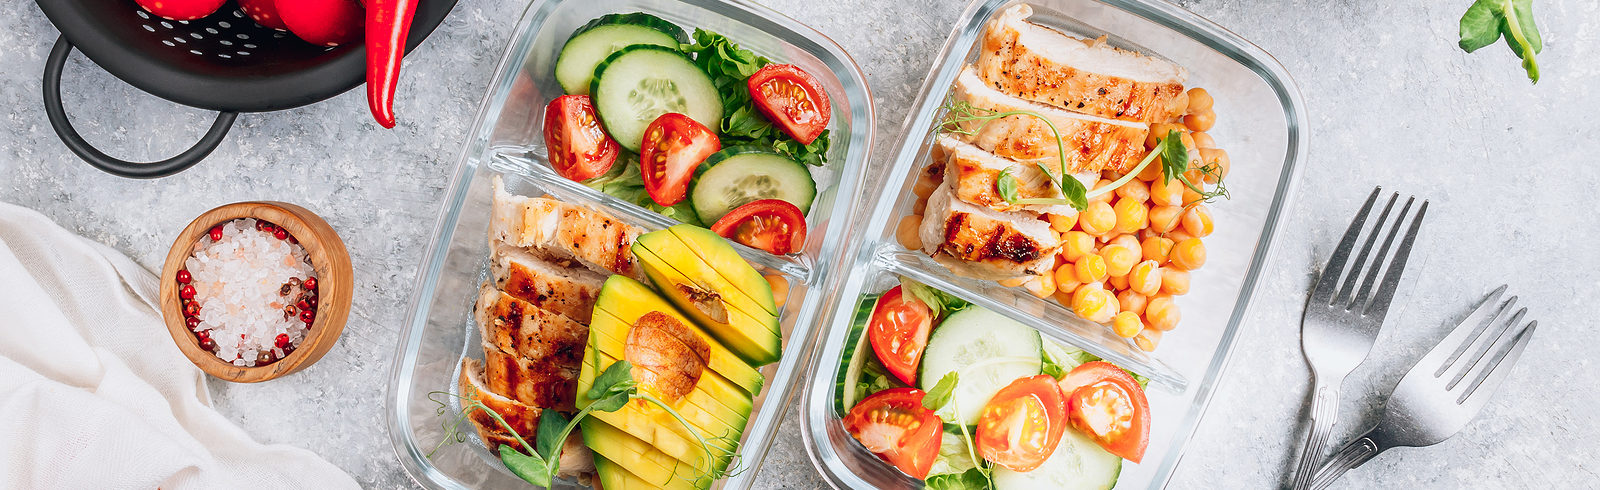 healthy meal prep with veggies and protein